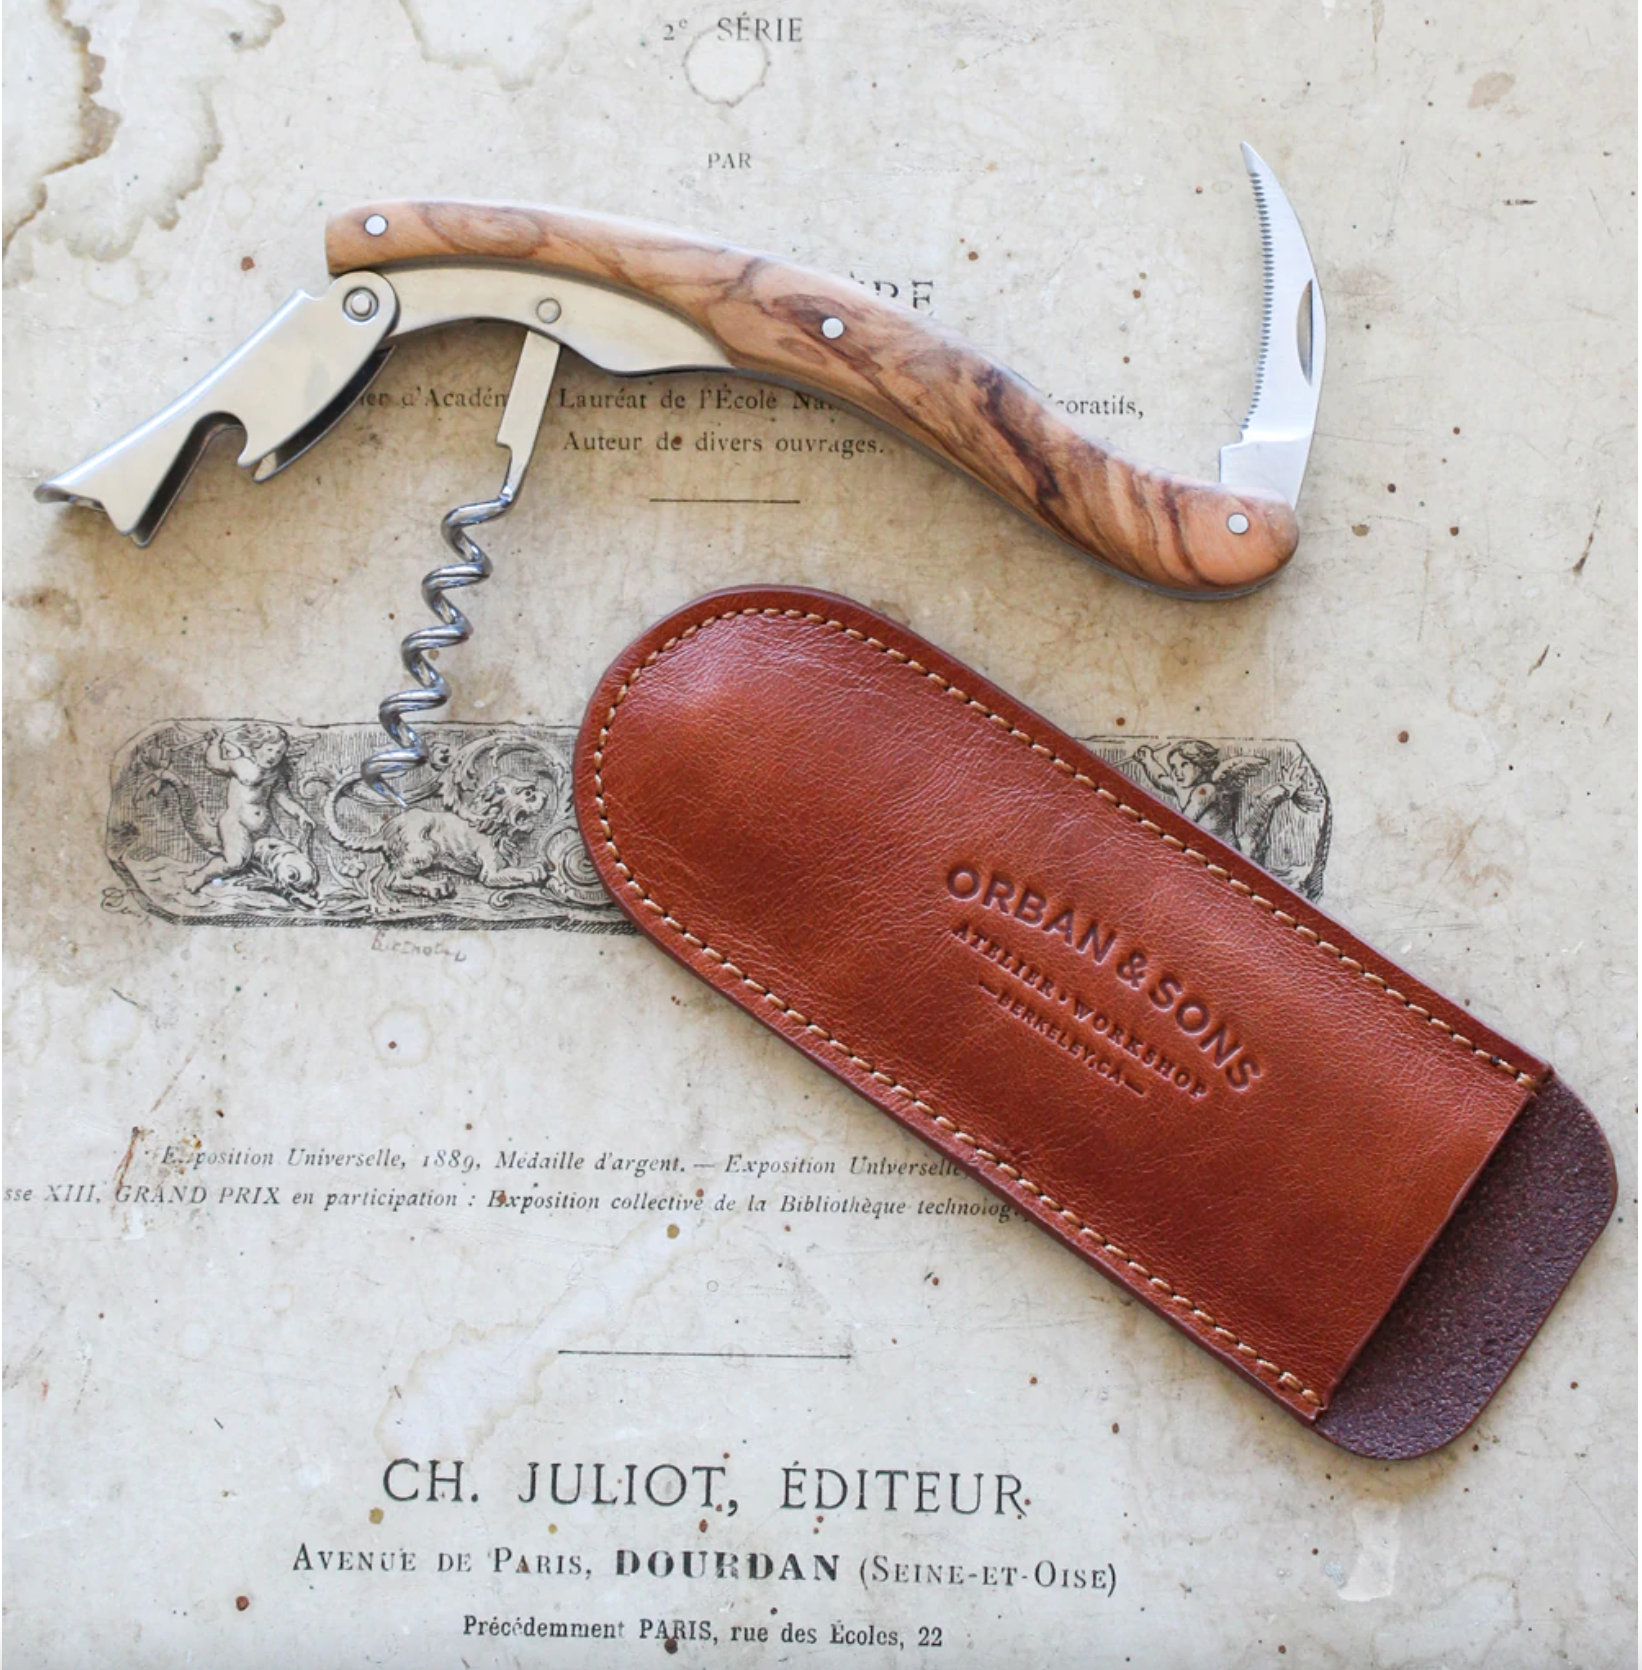 Olive wood corkscrew in a leather sheath